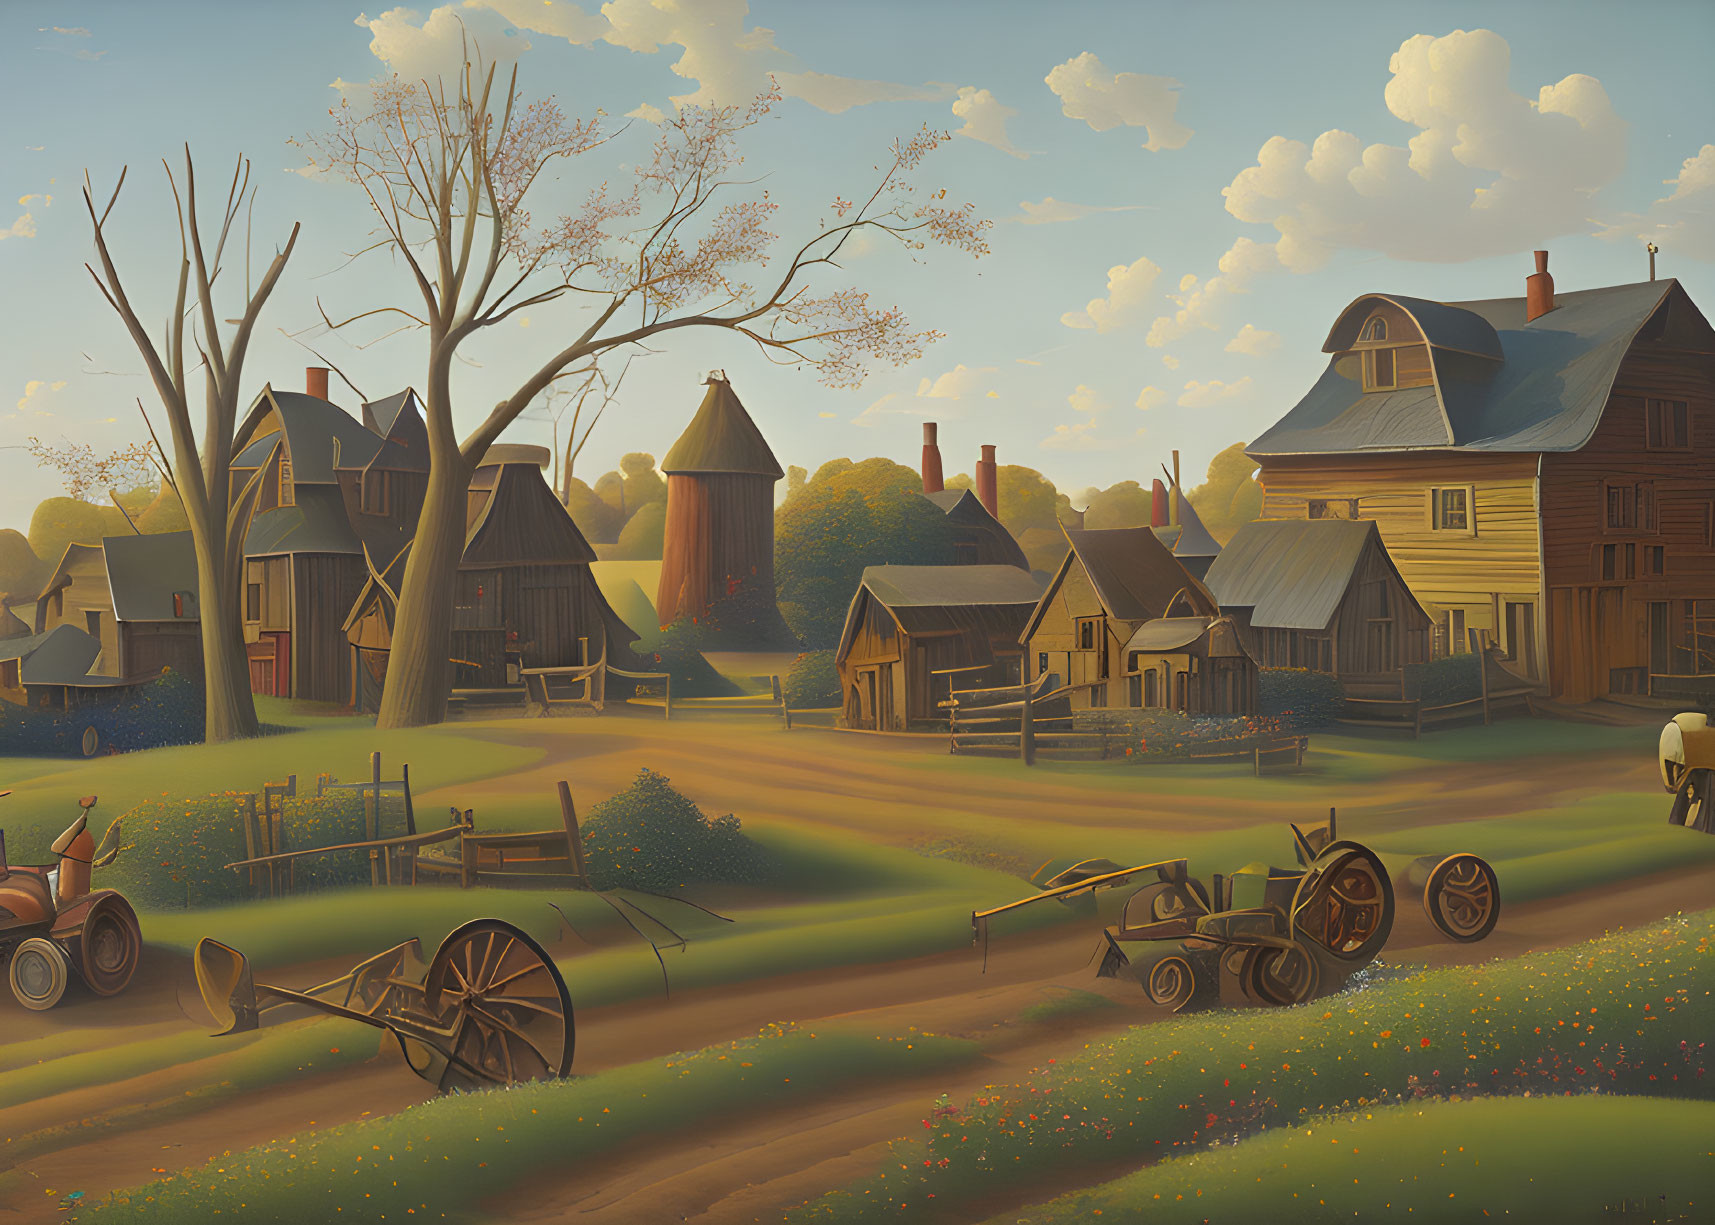 Rustic village scene with quaint houses, old tractor, water tower, and flower fields at sunset